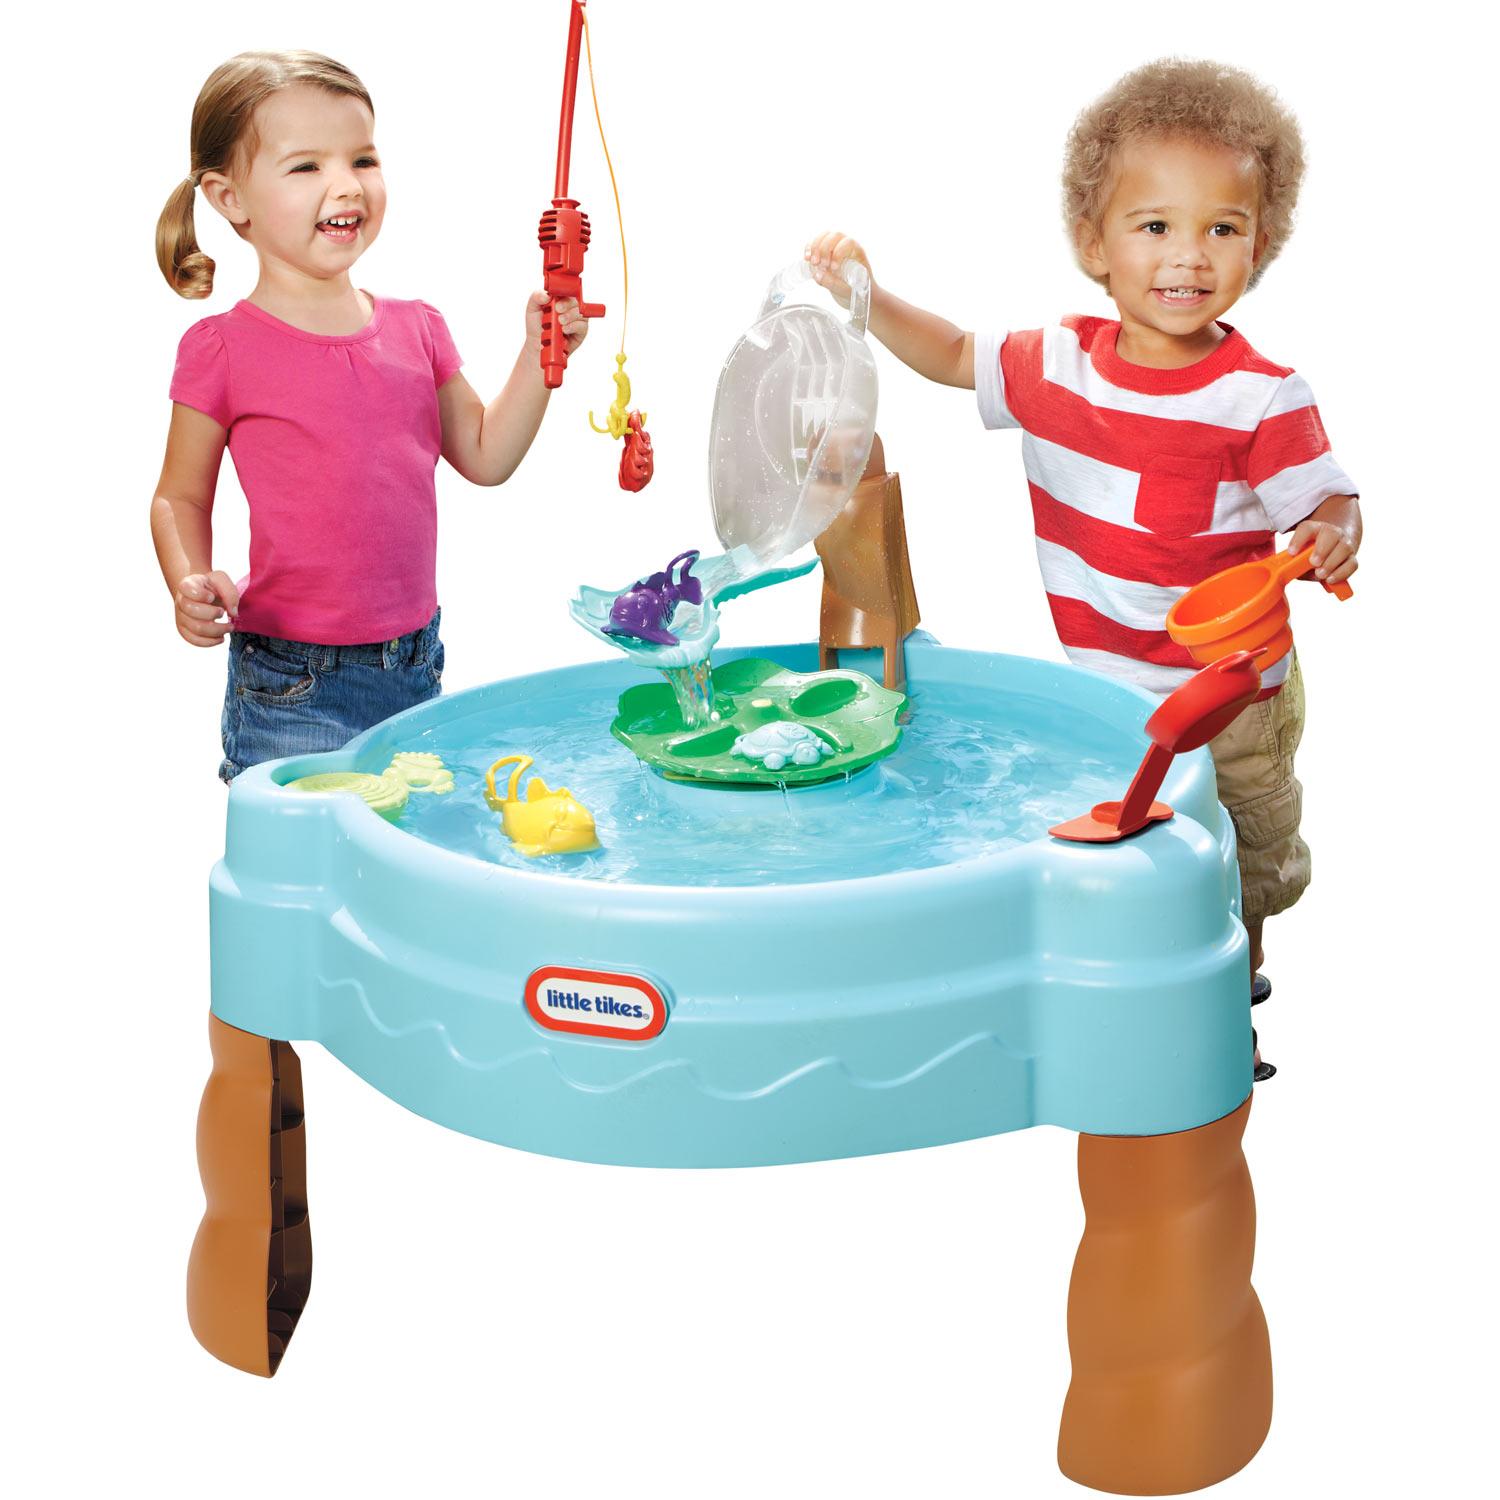 Children Fishing Pole Water Table Toy